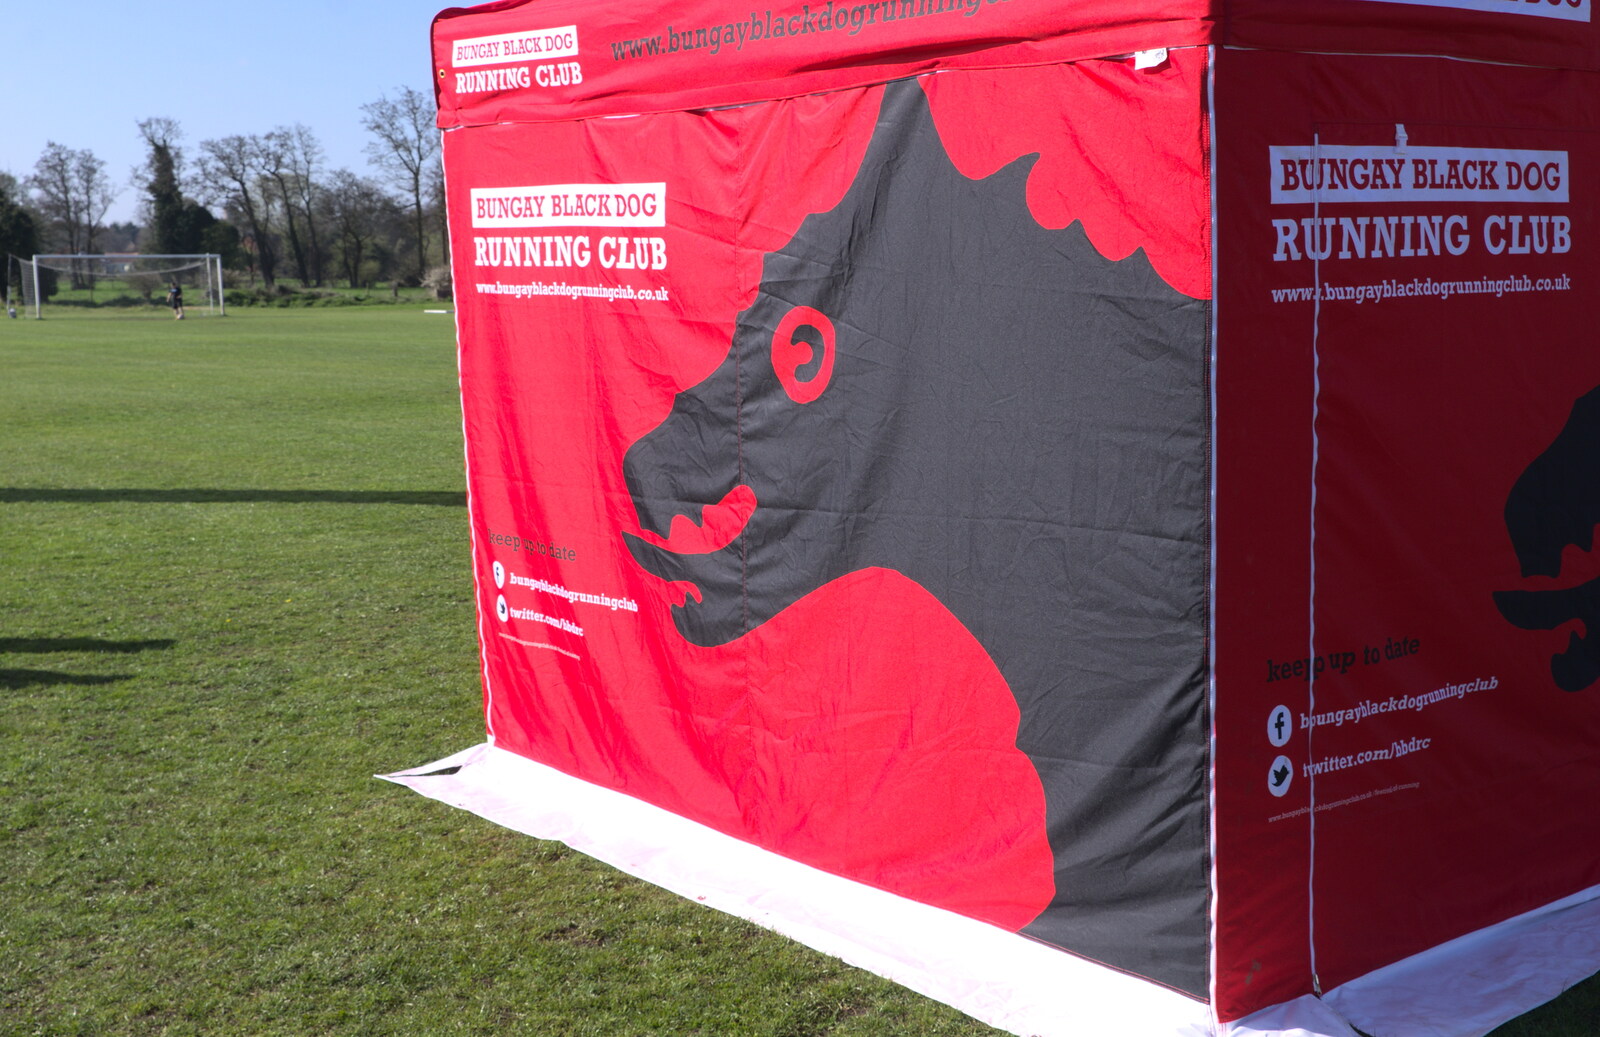 The Black Dog logo on a tent from The Black Dog Festival of Running, Bungay, Suffolk - 2nd April 2017